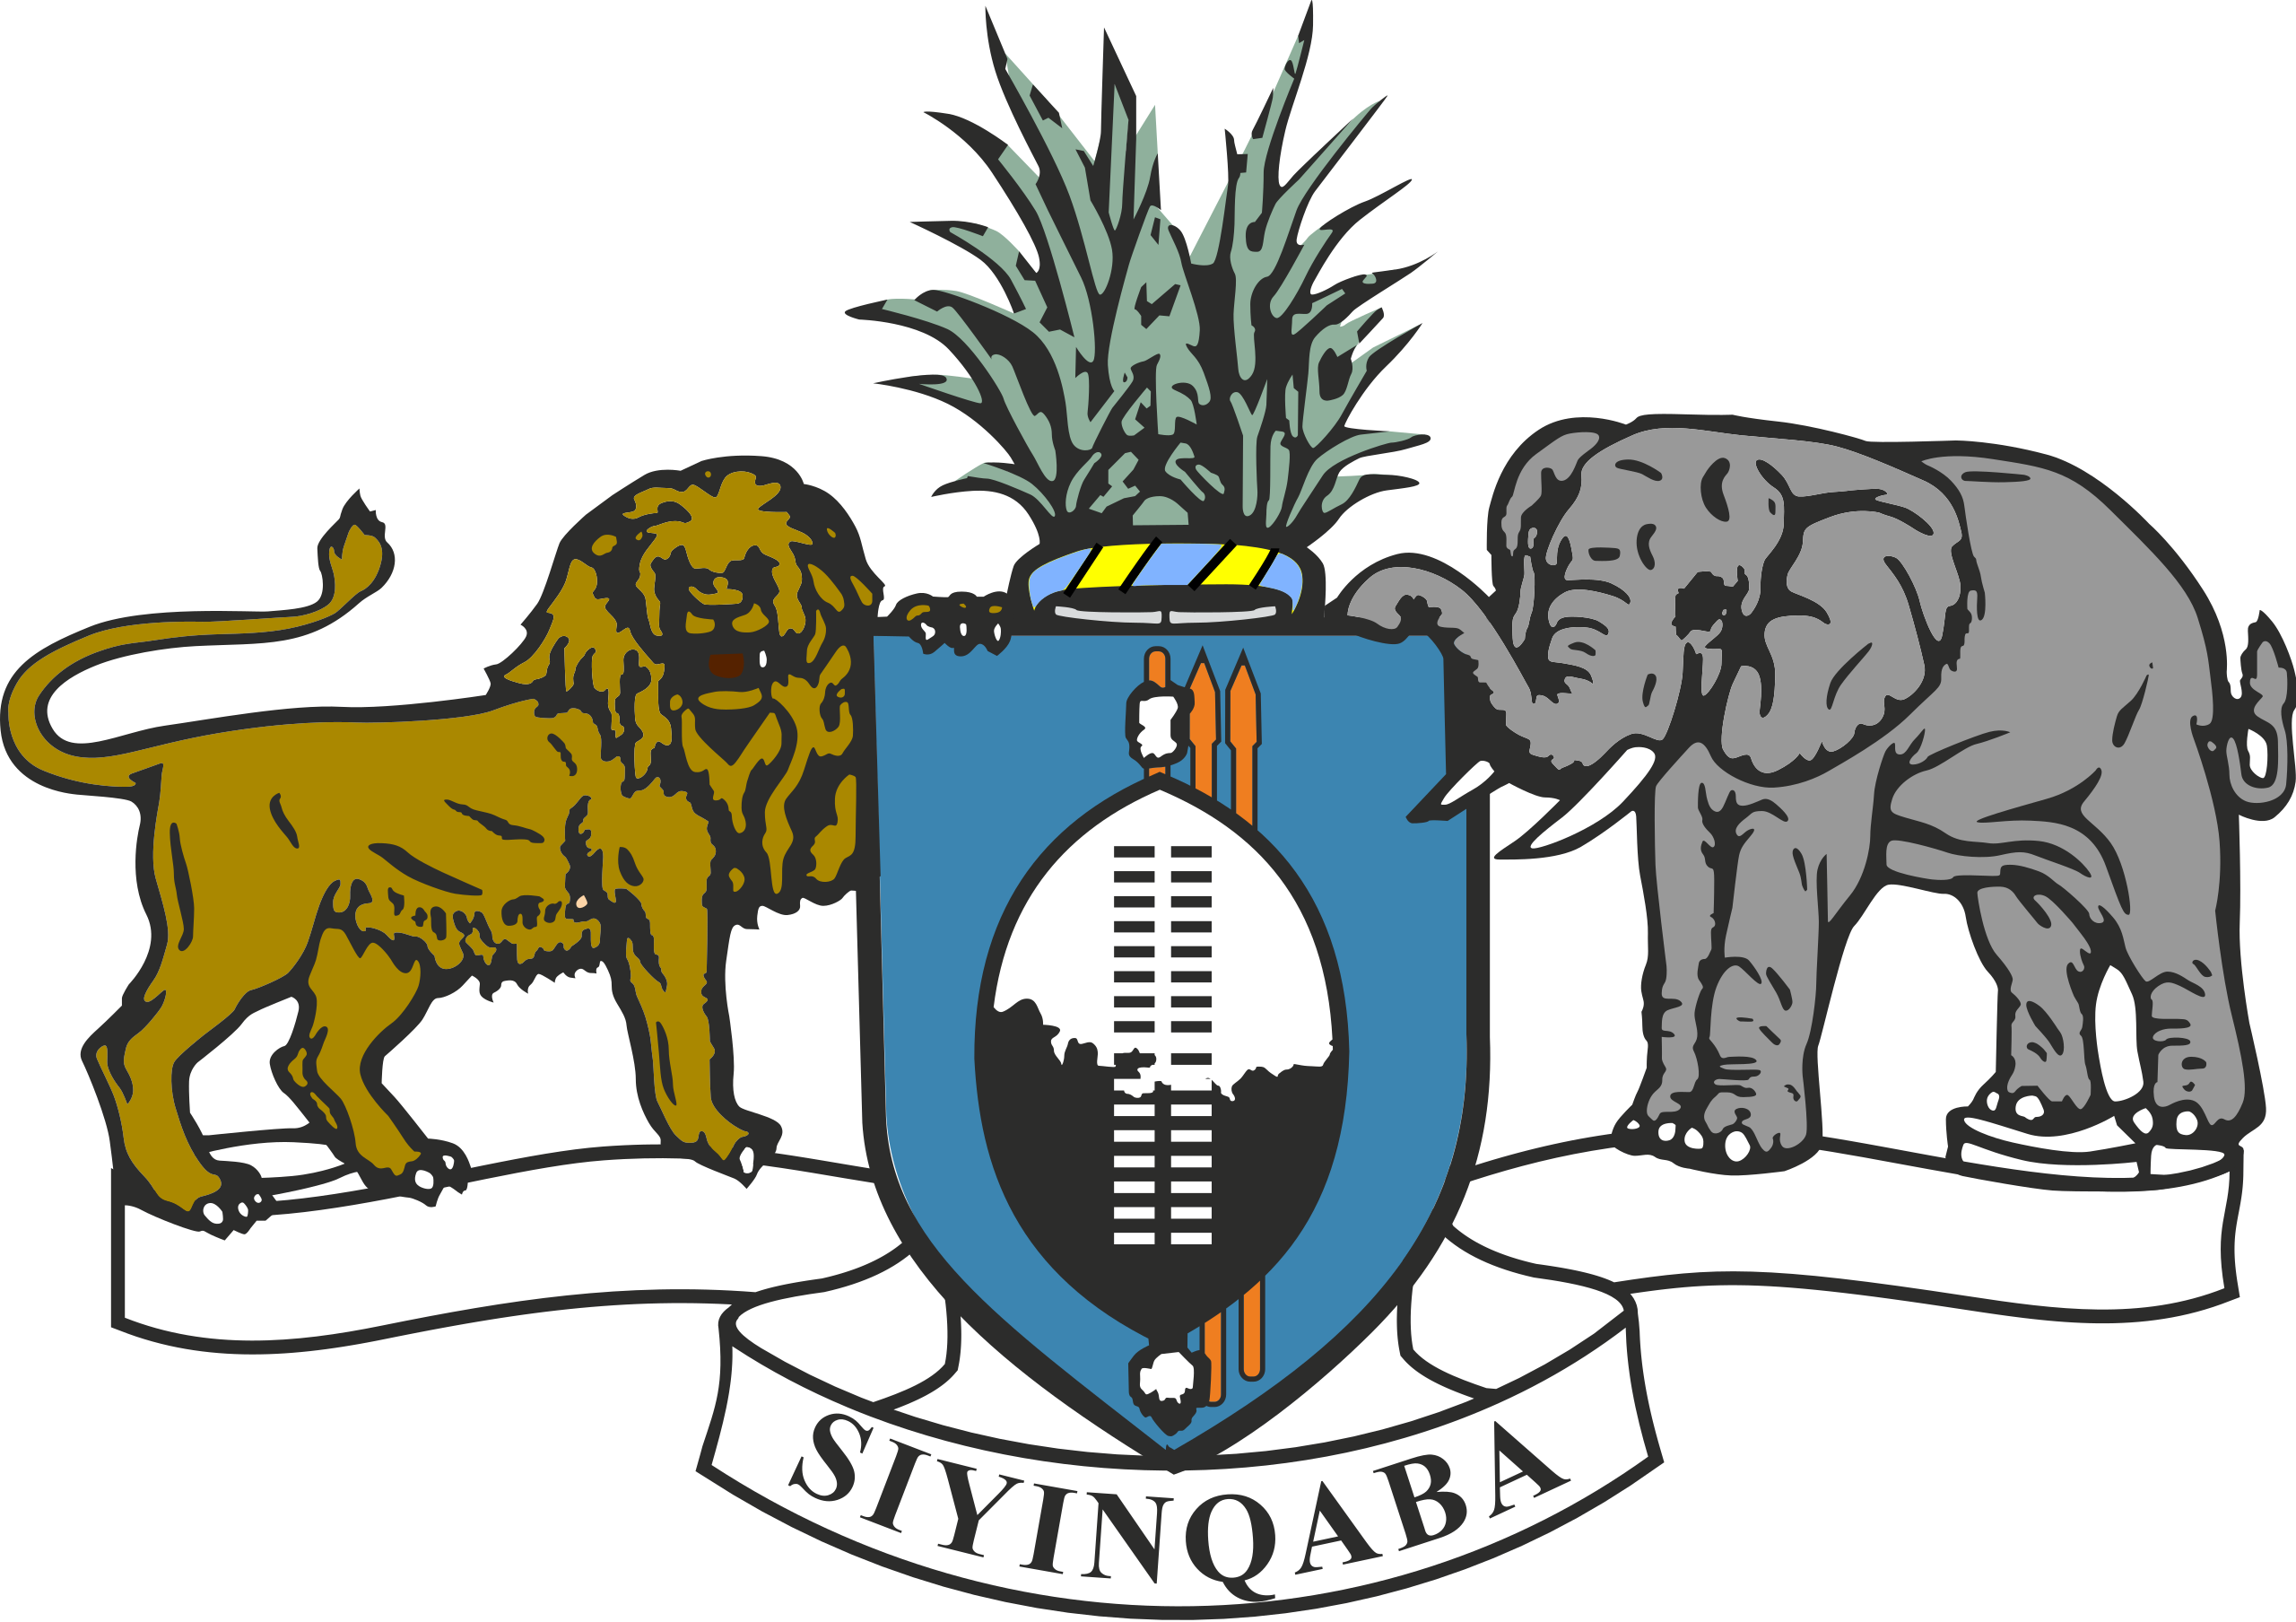 Coat of arms of Kingdom of Eswatini